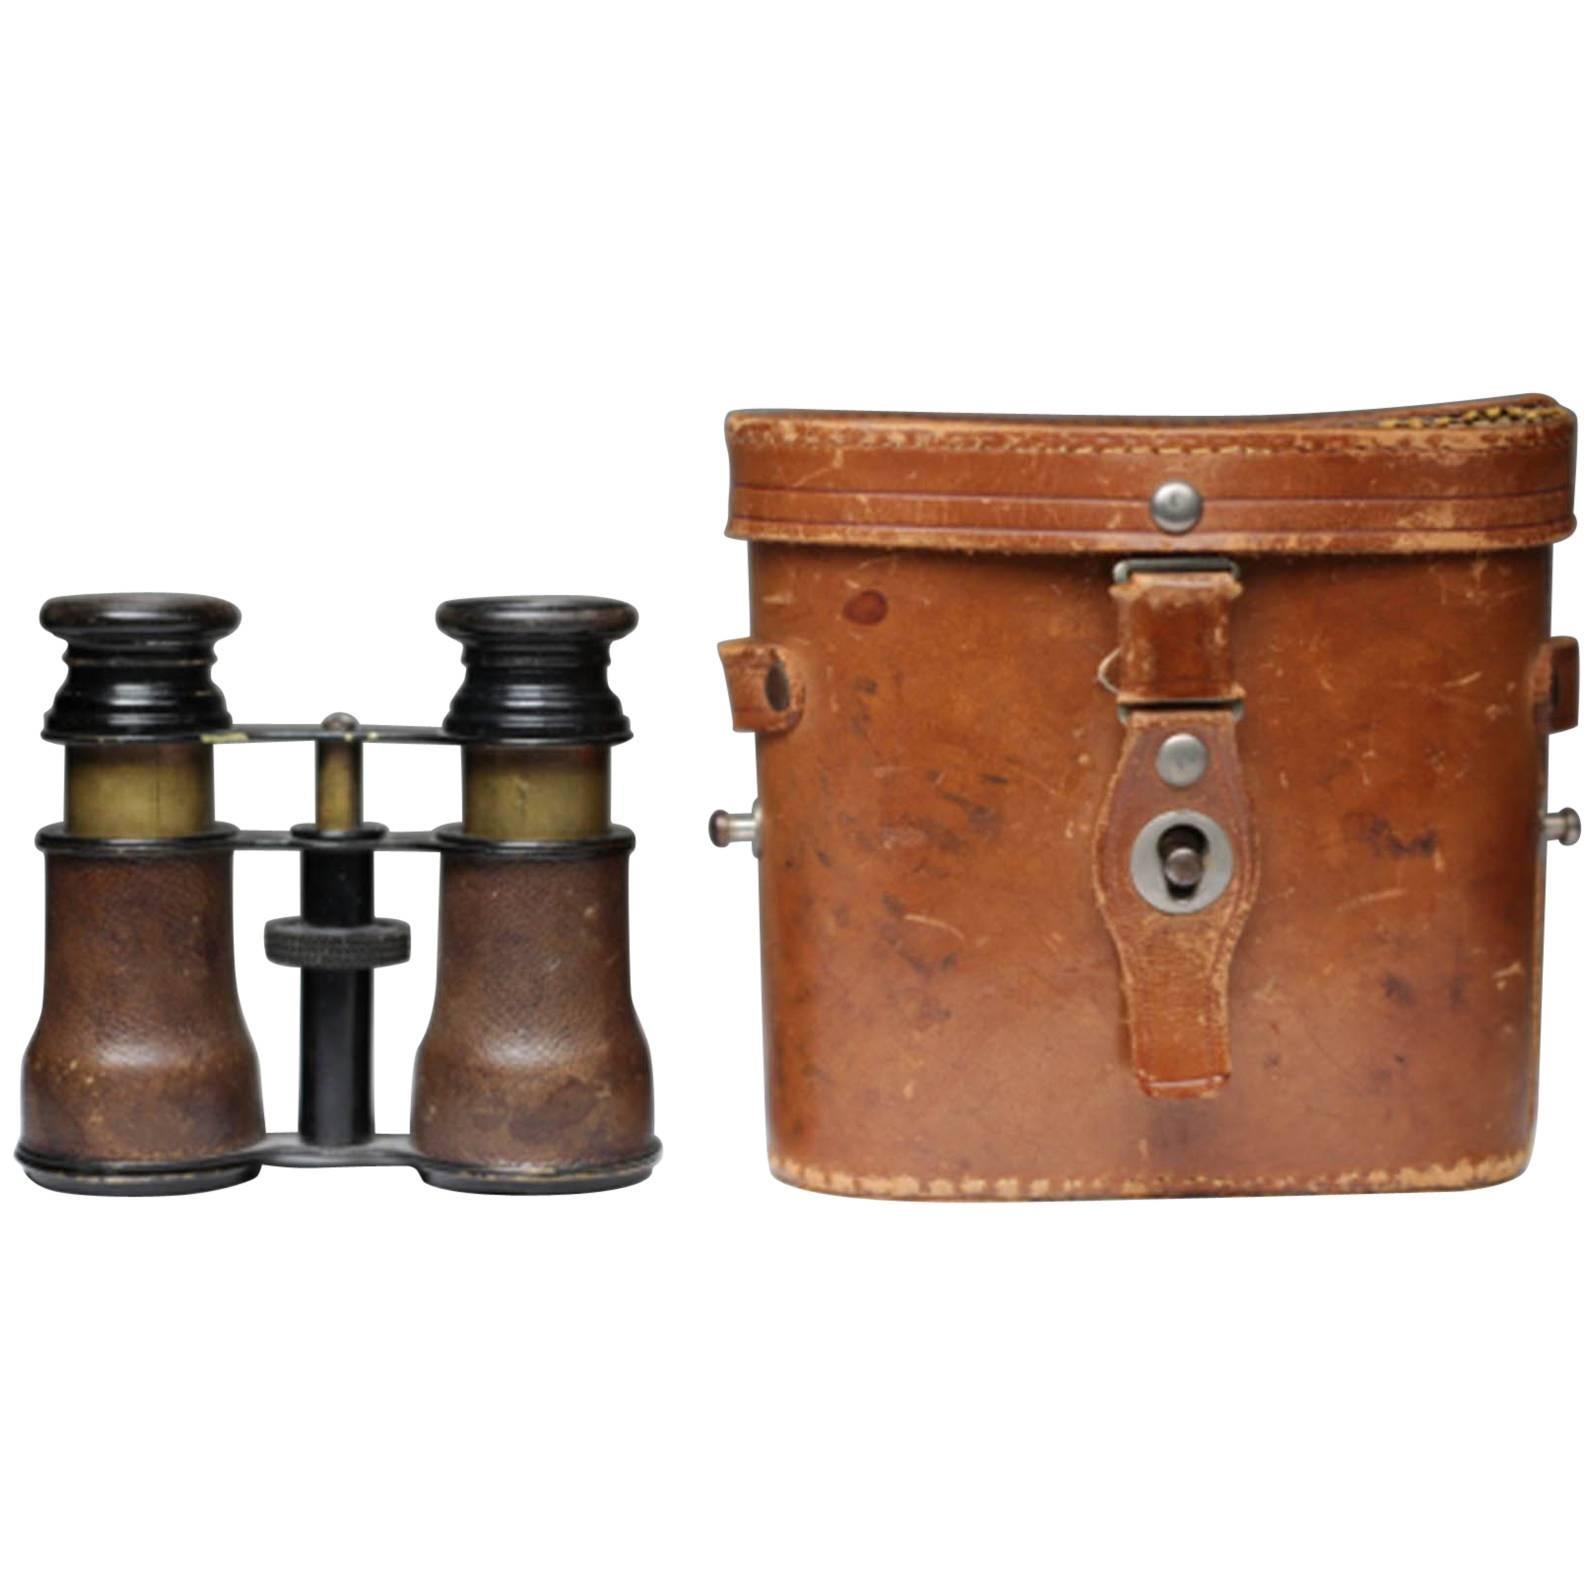 Antique Shark Skin Wrapped Opera Glasses and Leather Case, circa 1800s